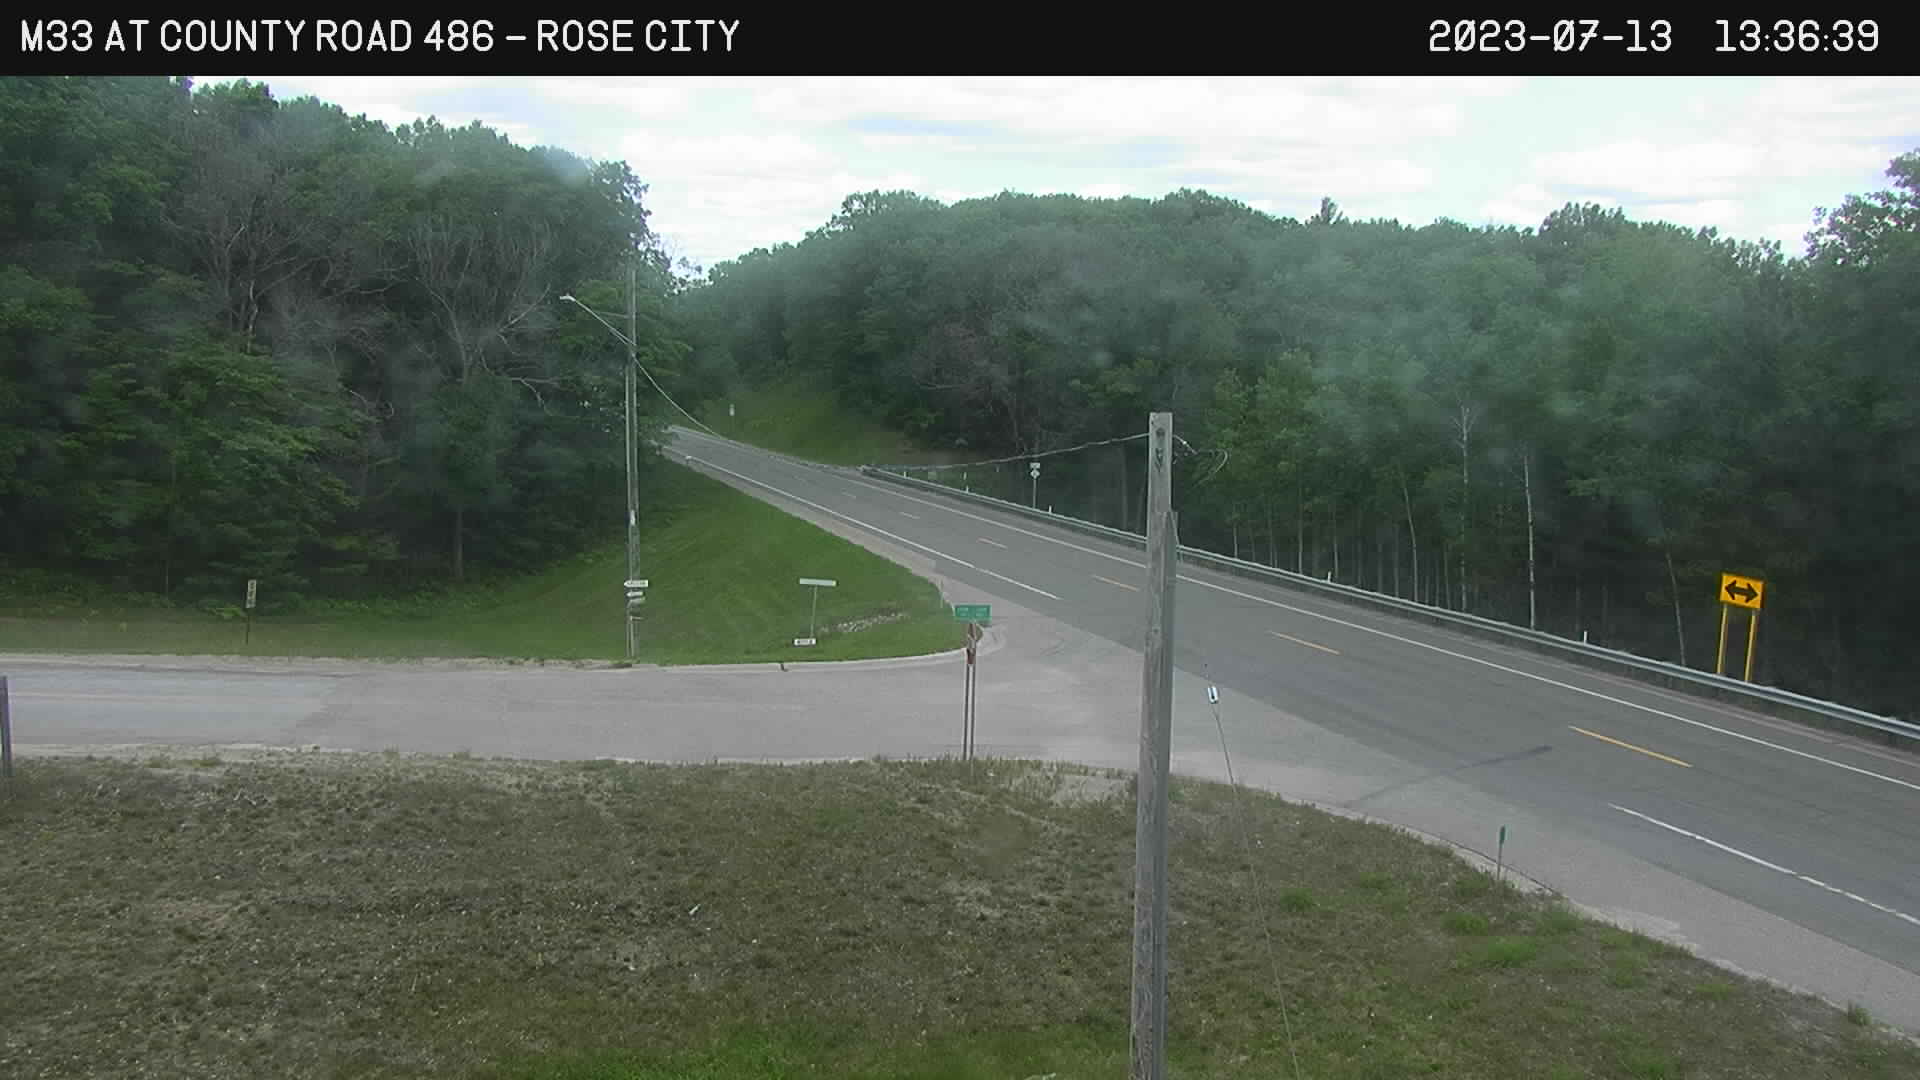 Traffic Cam @ County Road 486 - Traffic closest to camera Player